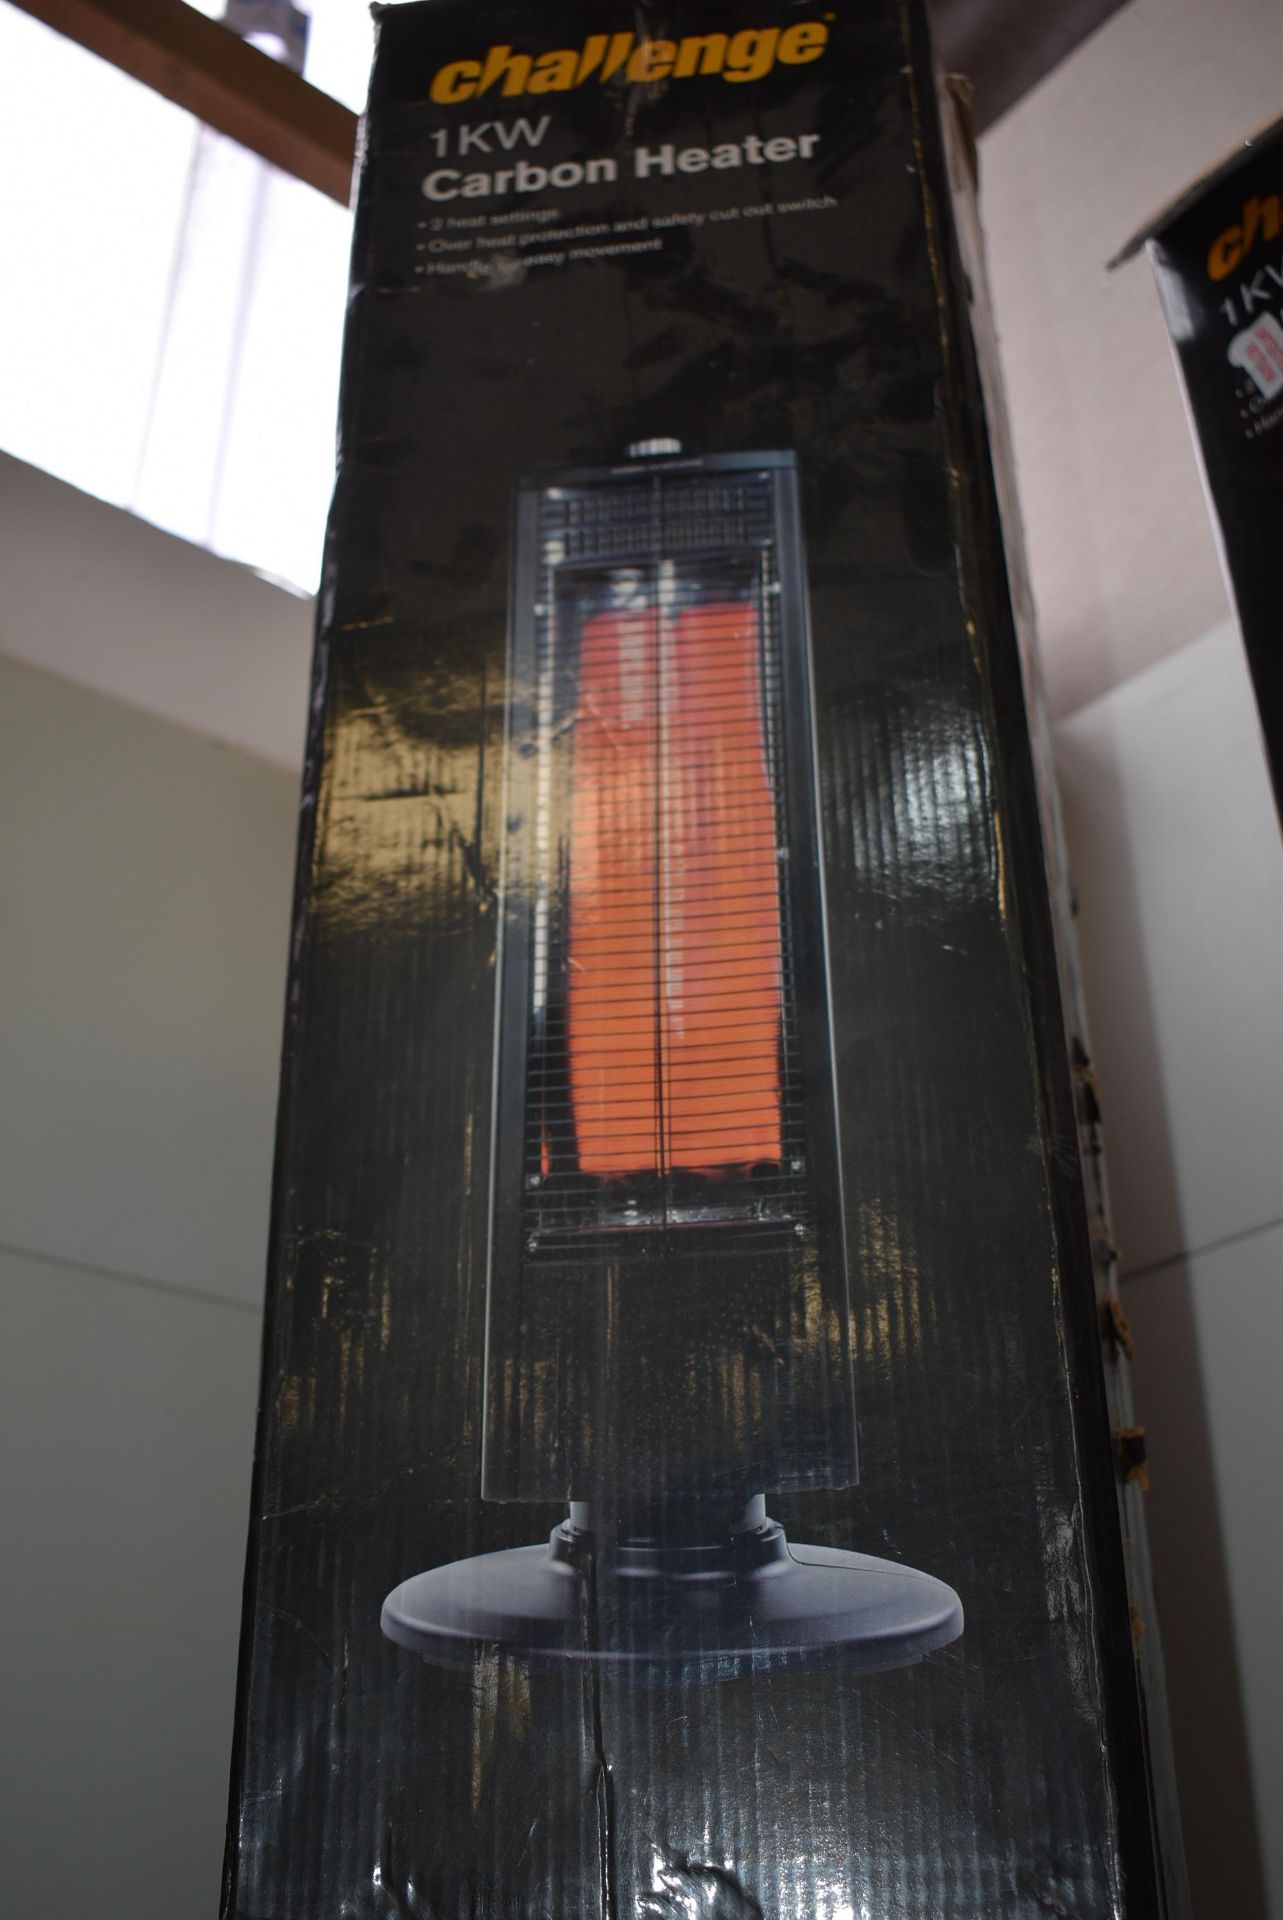 Challenge Carbon Heater - Image 2 of 2